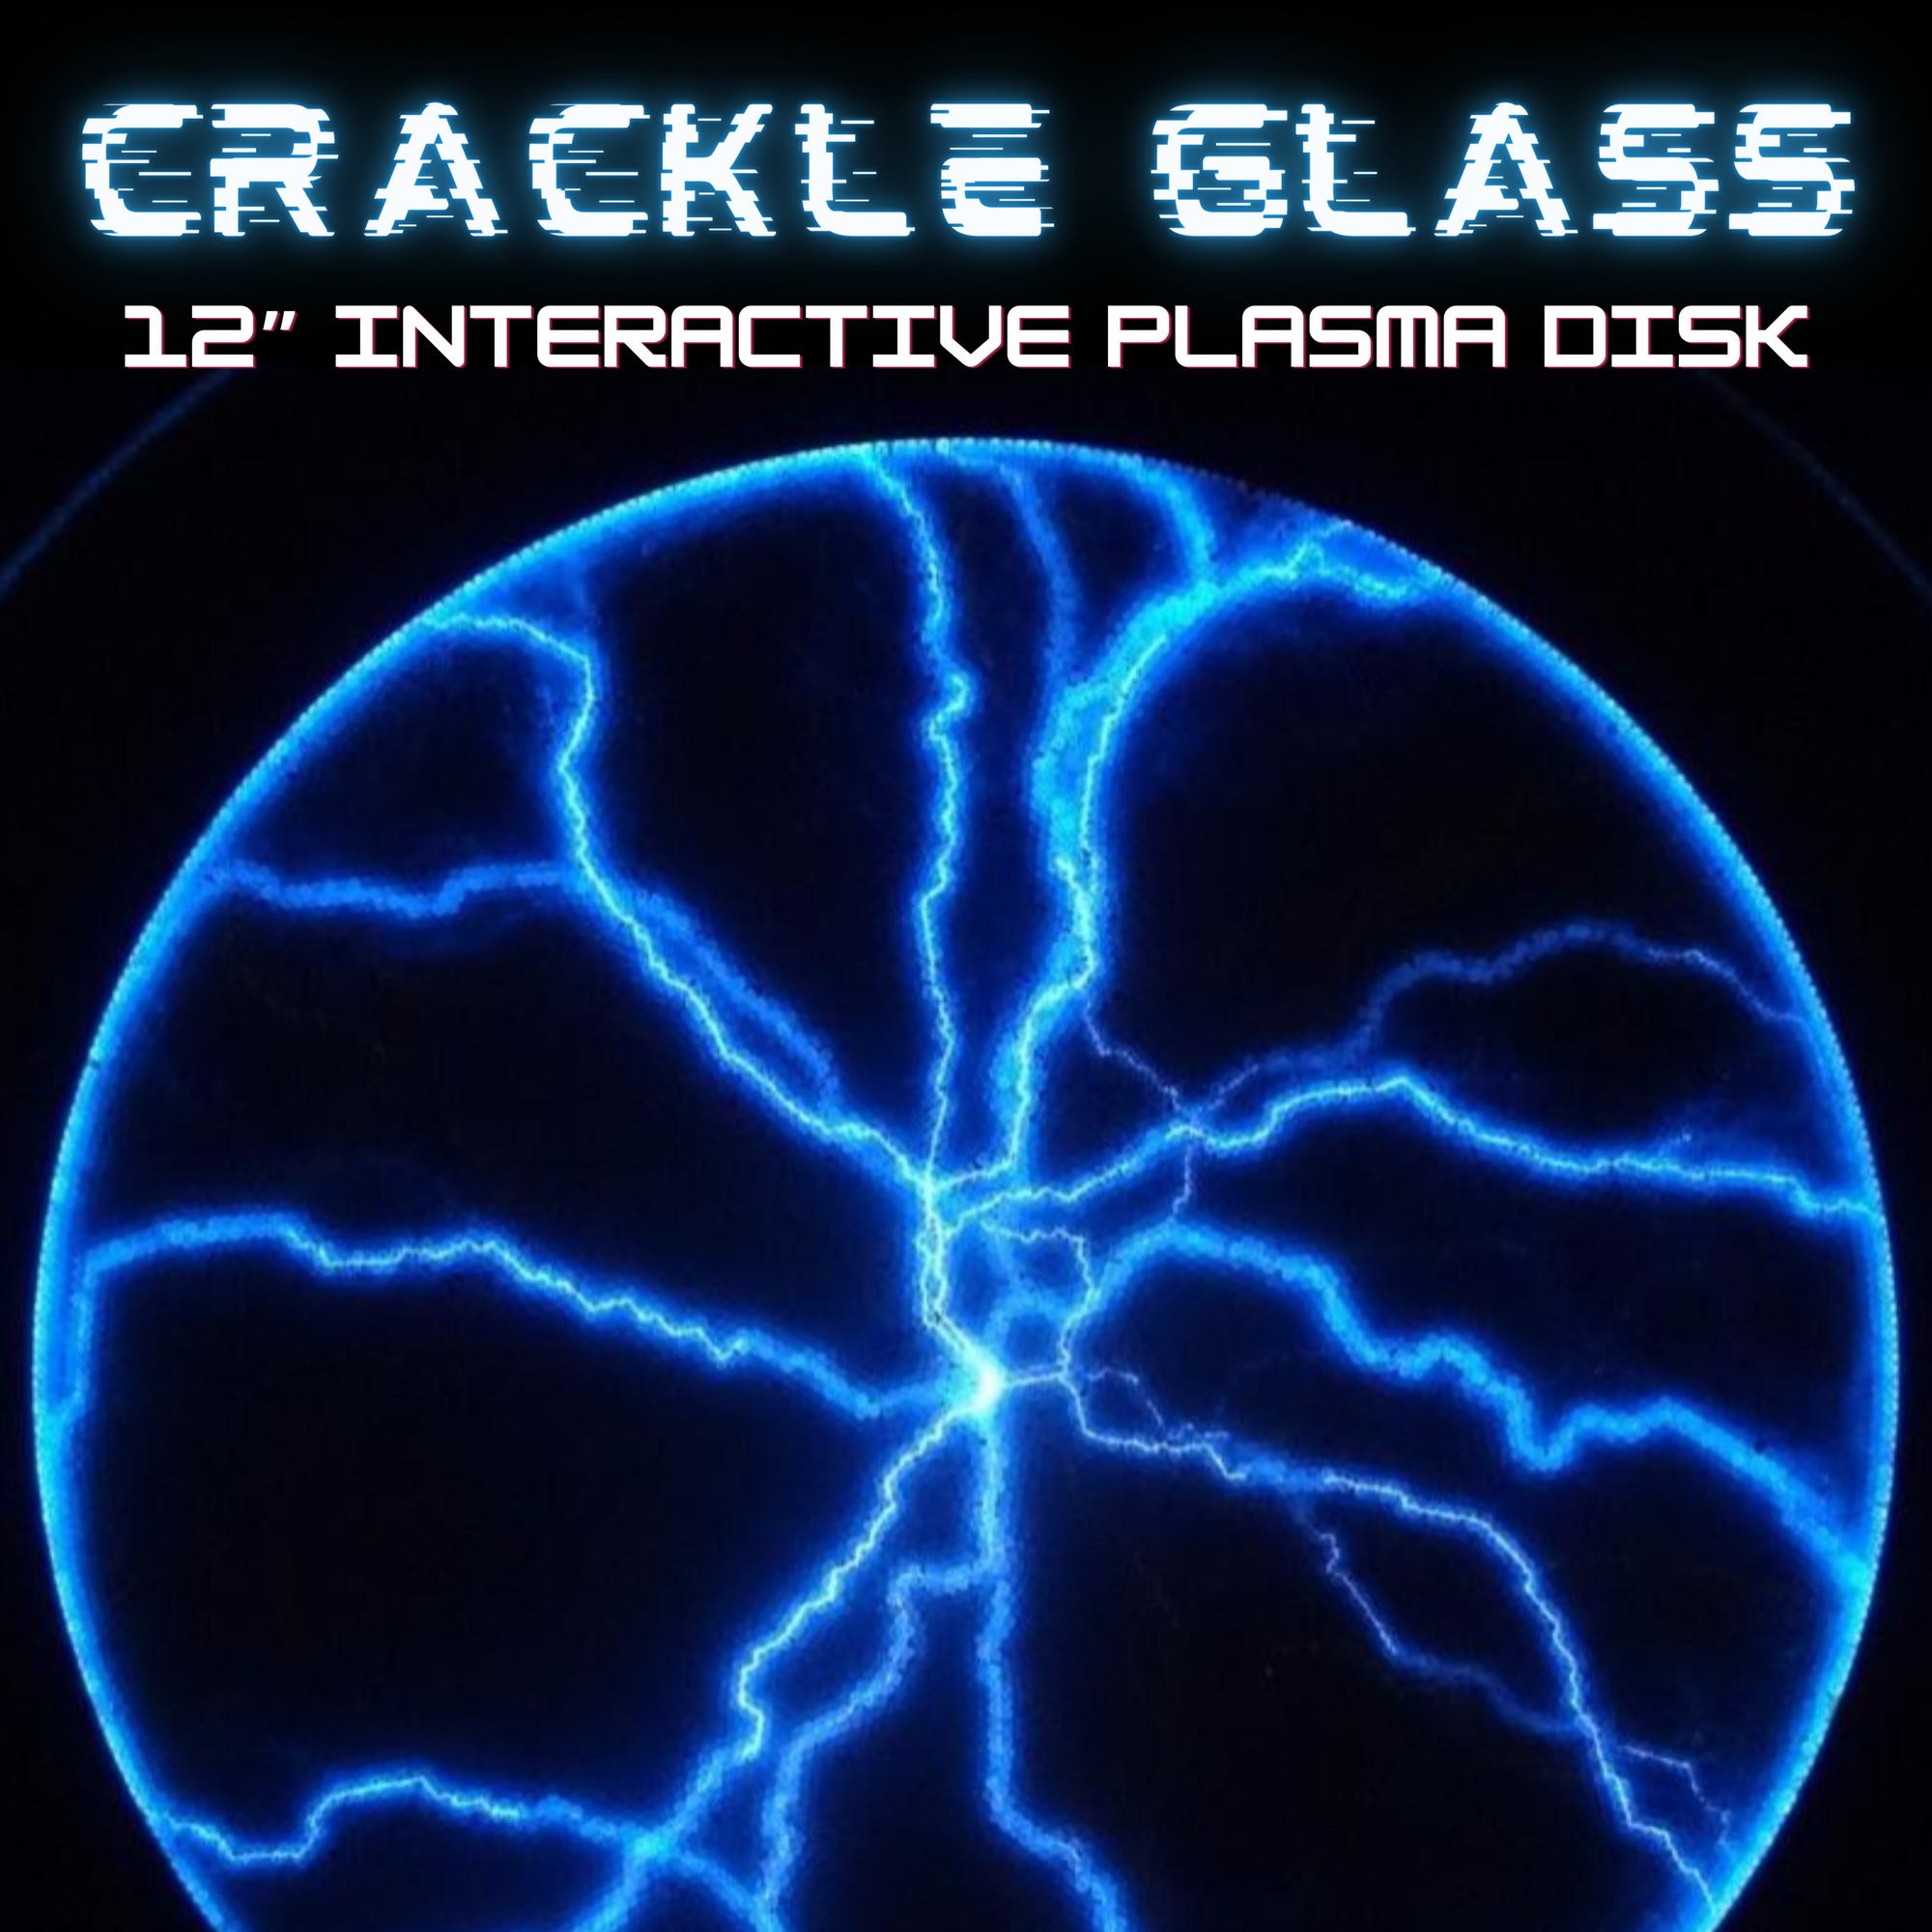 Crackle Glass